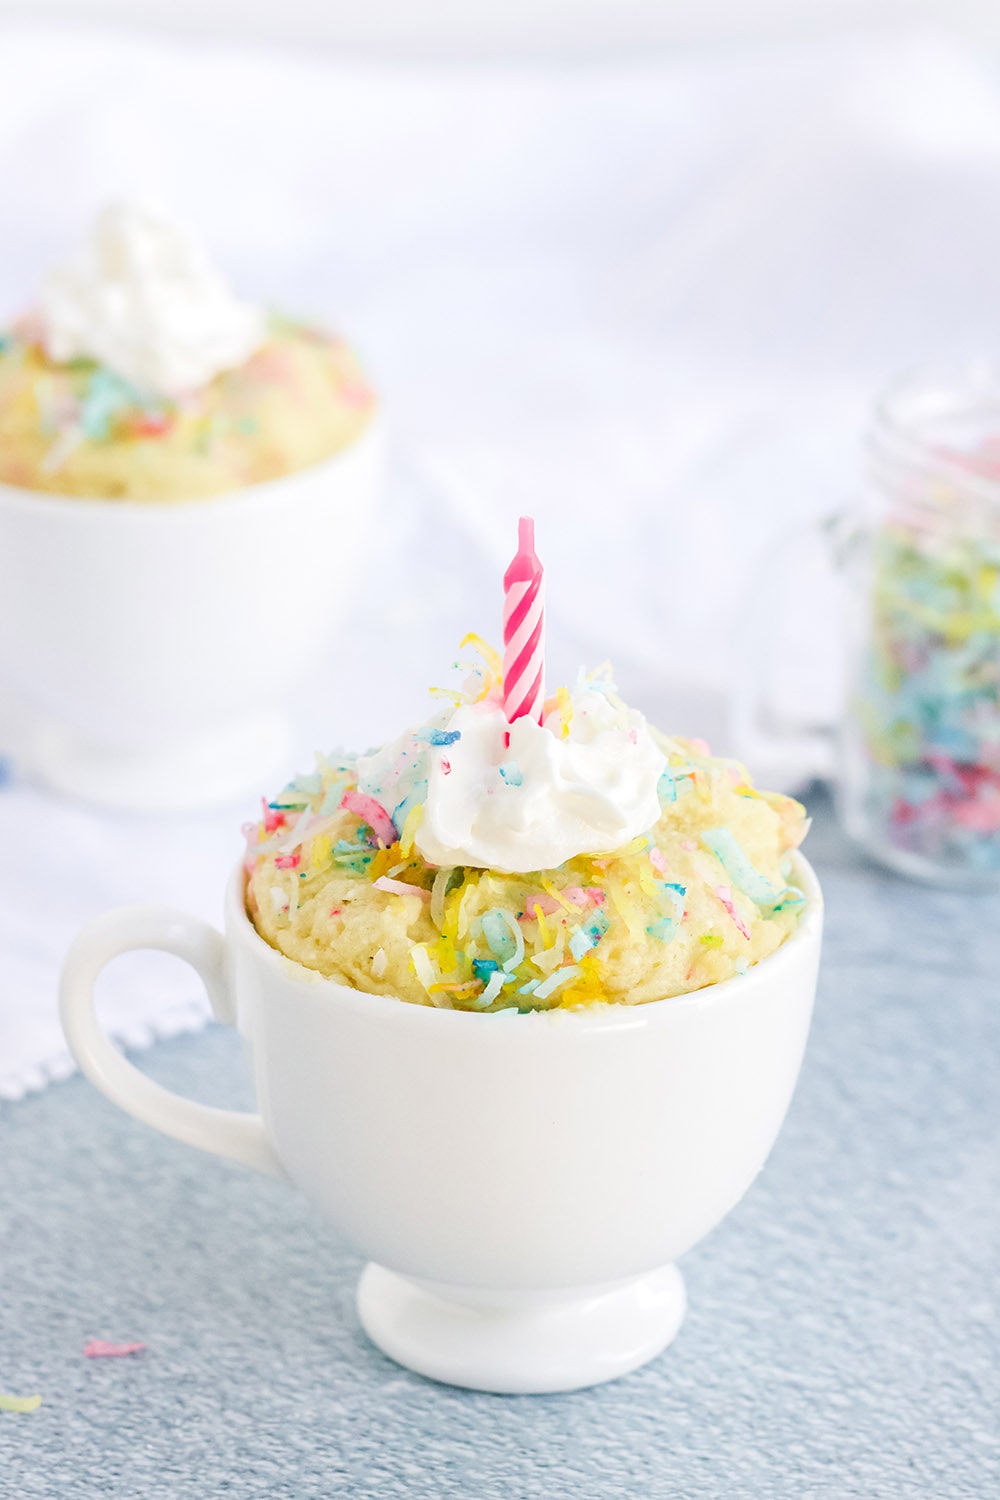 Keto birthday cake in a mug with a candle.